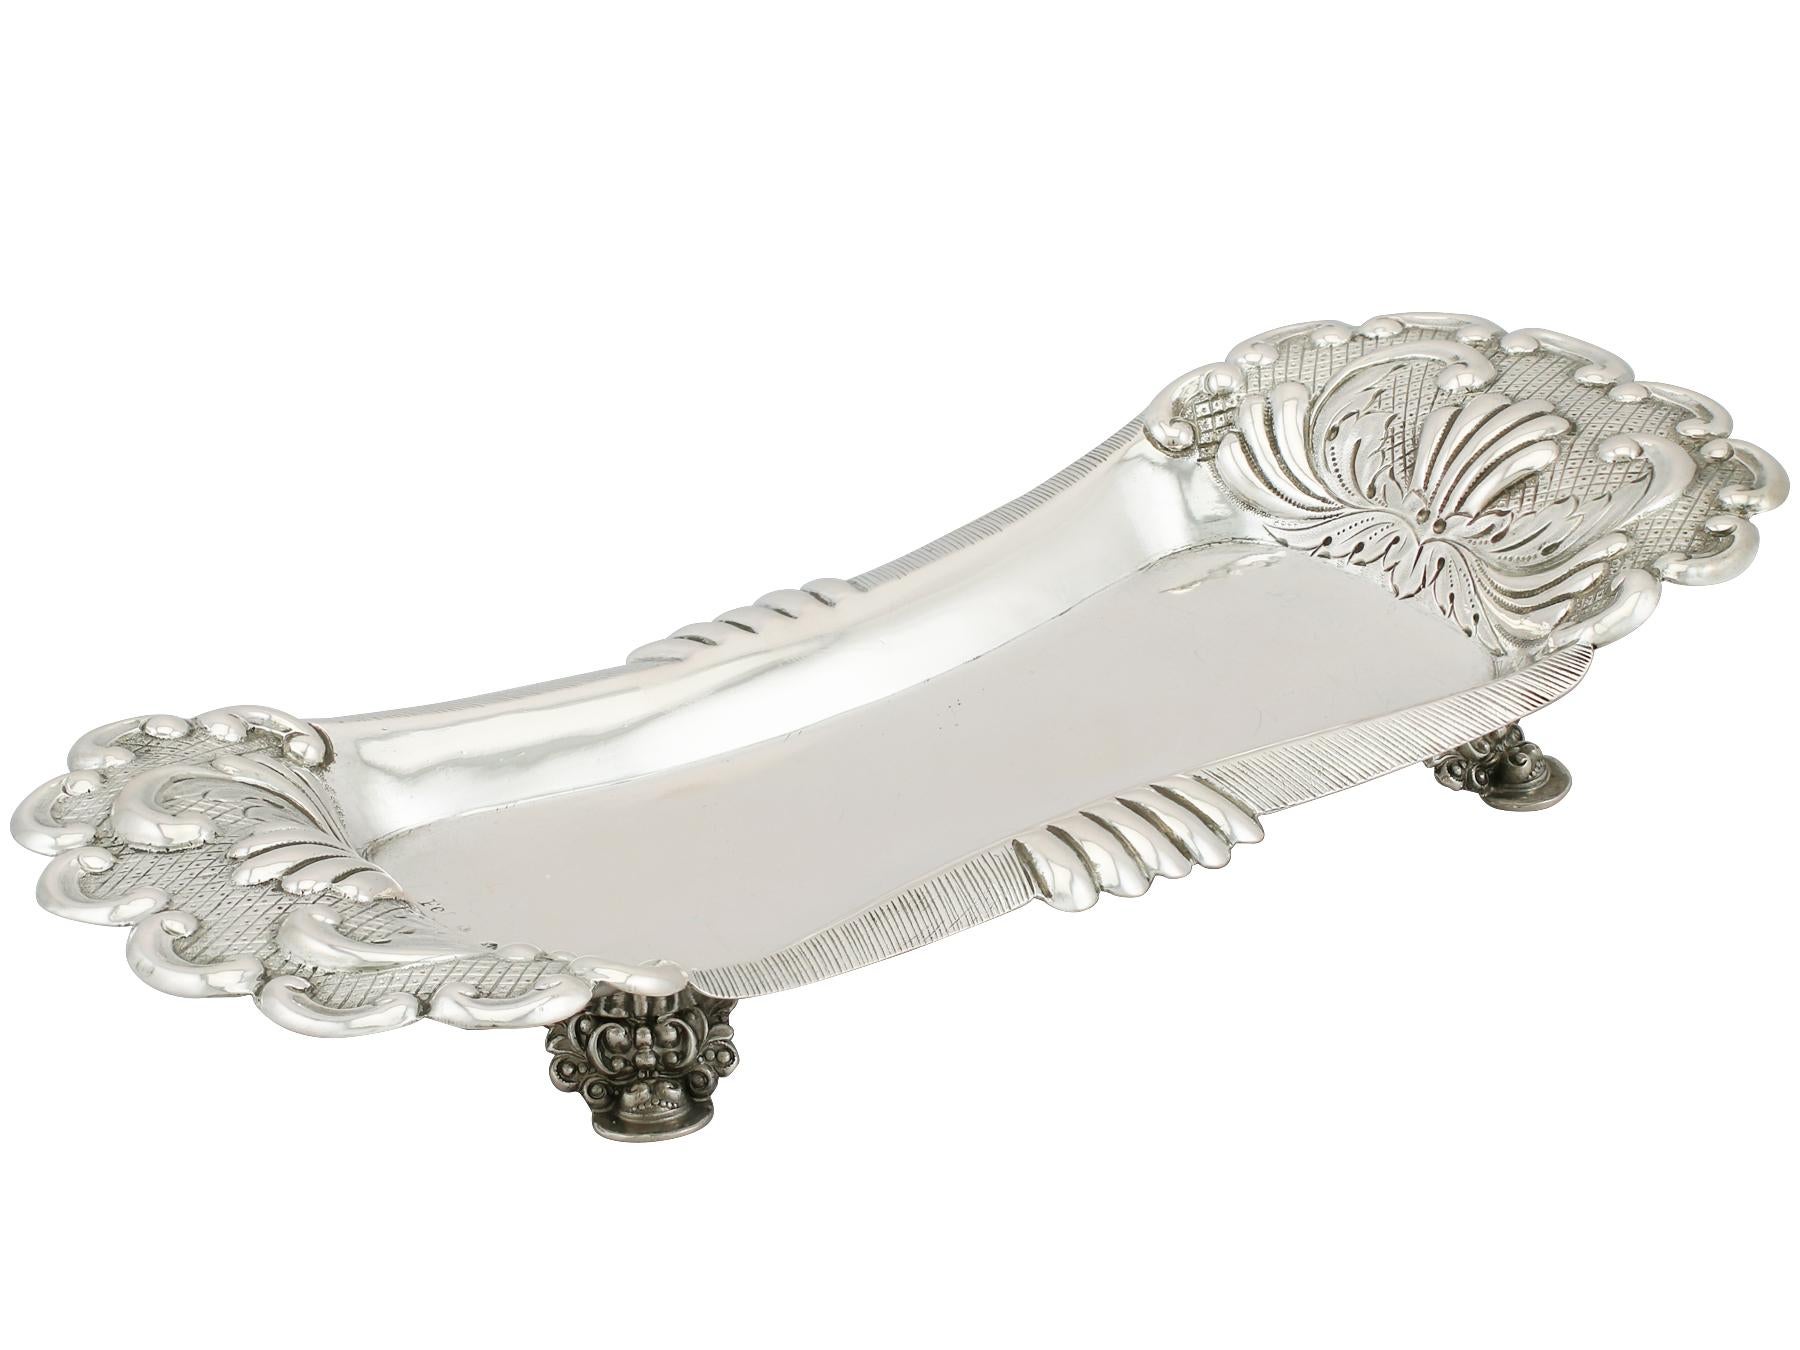 Early 19th Century Antique German Silver Wick Trimmers and Snuffer Tray, circa 1825